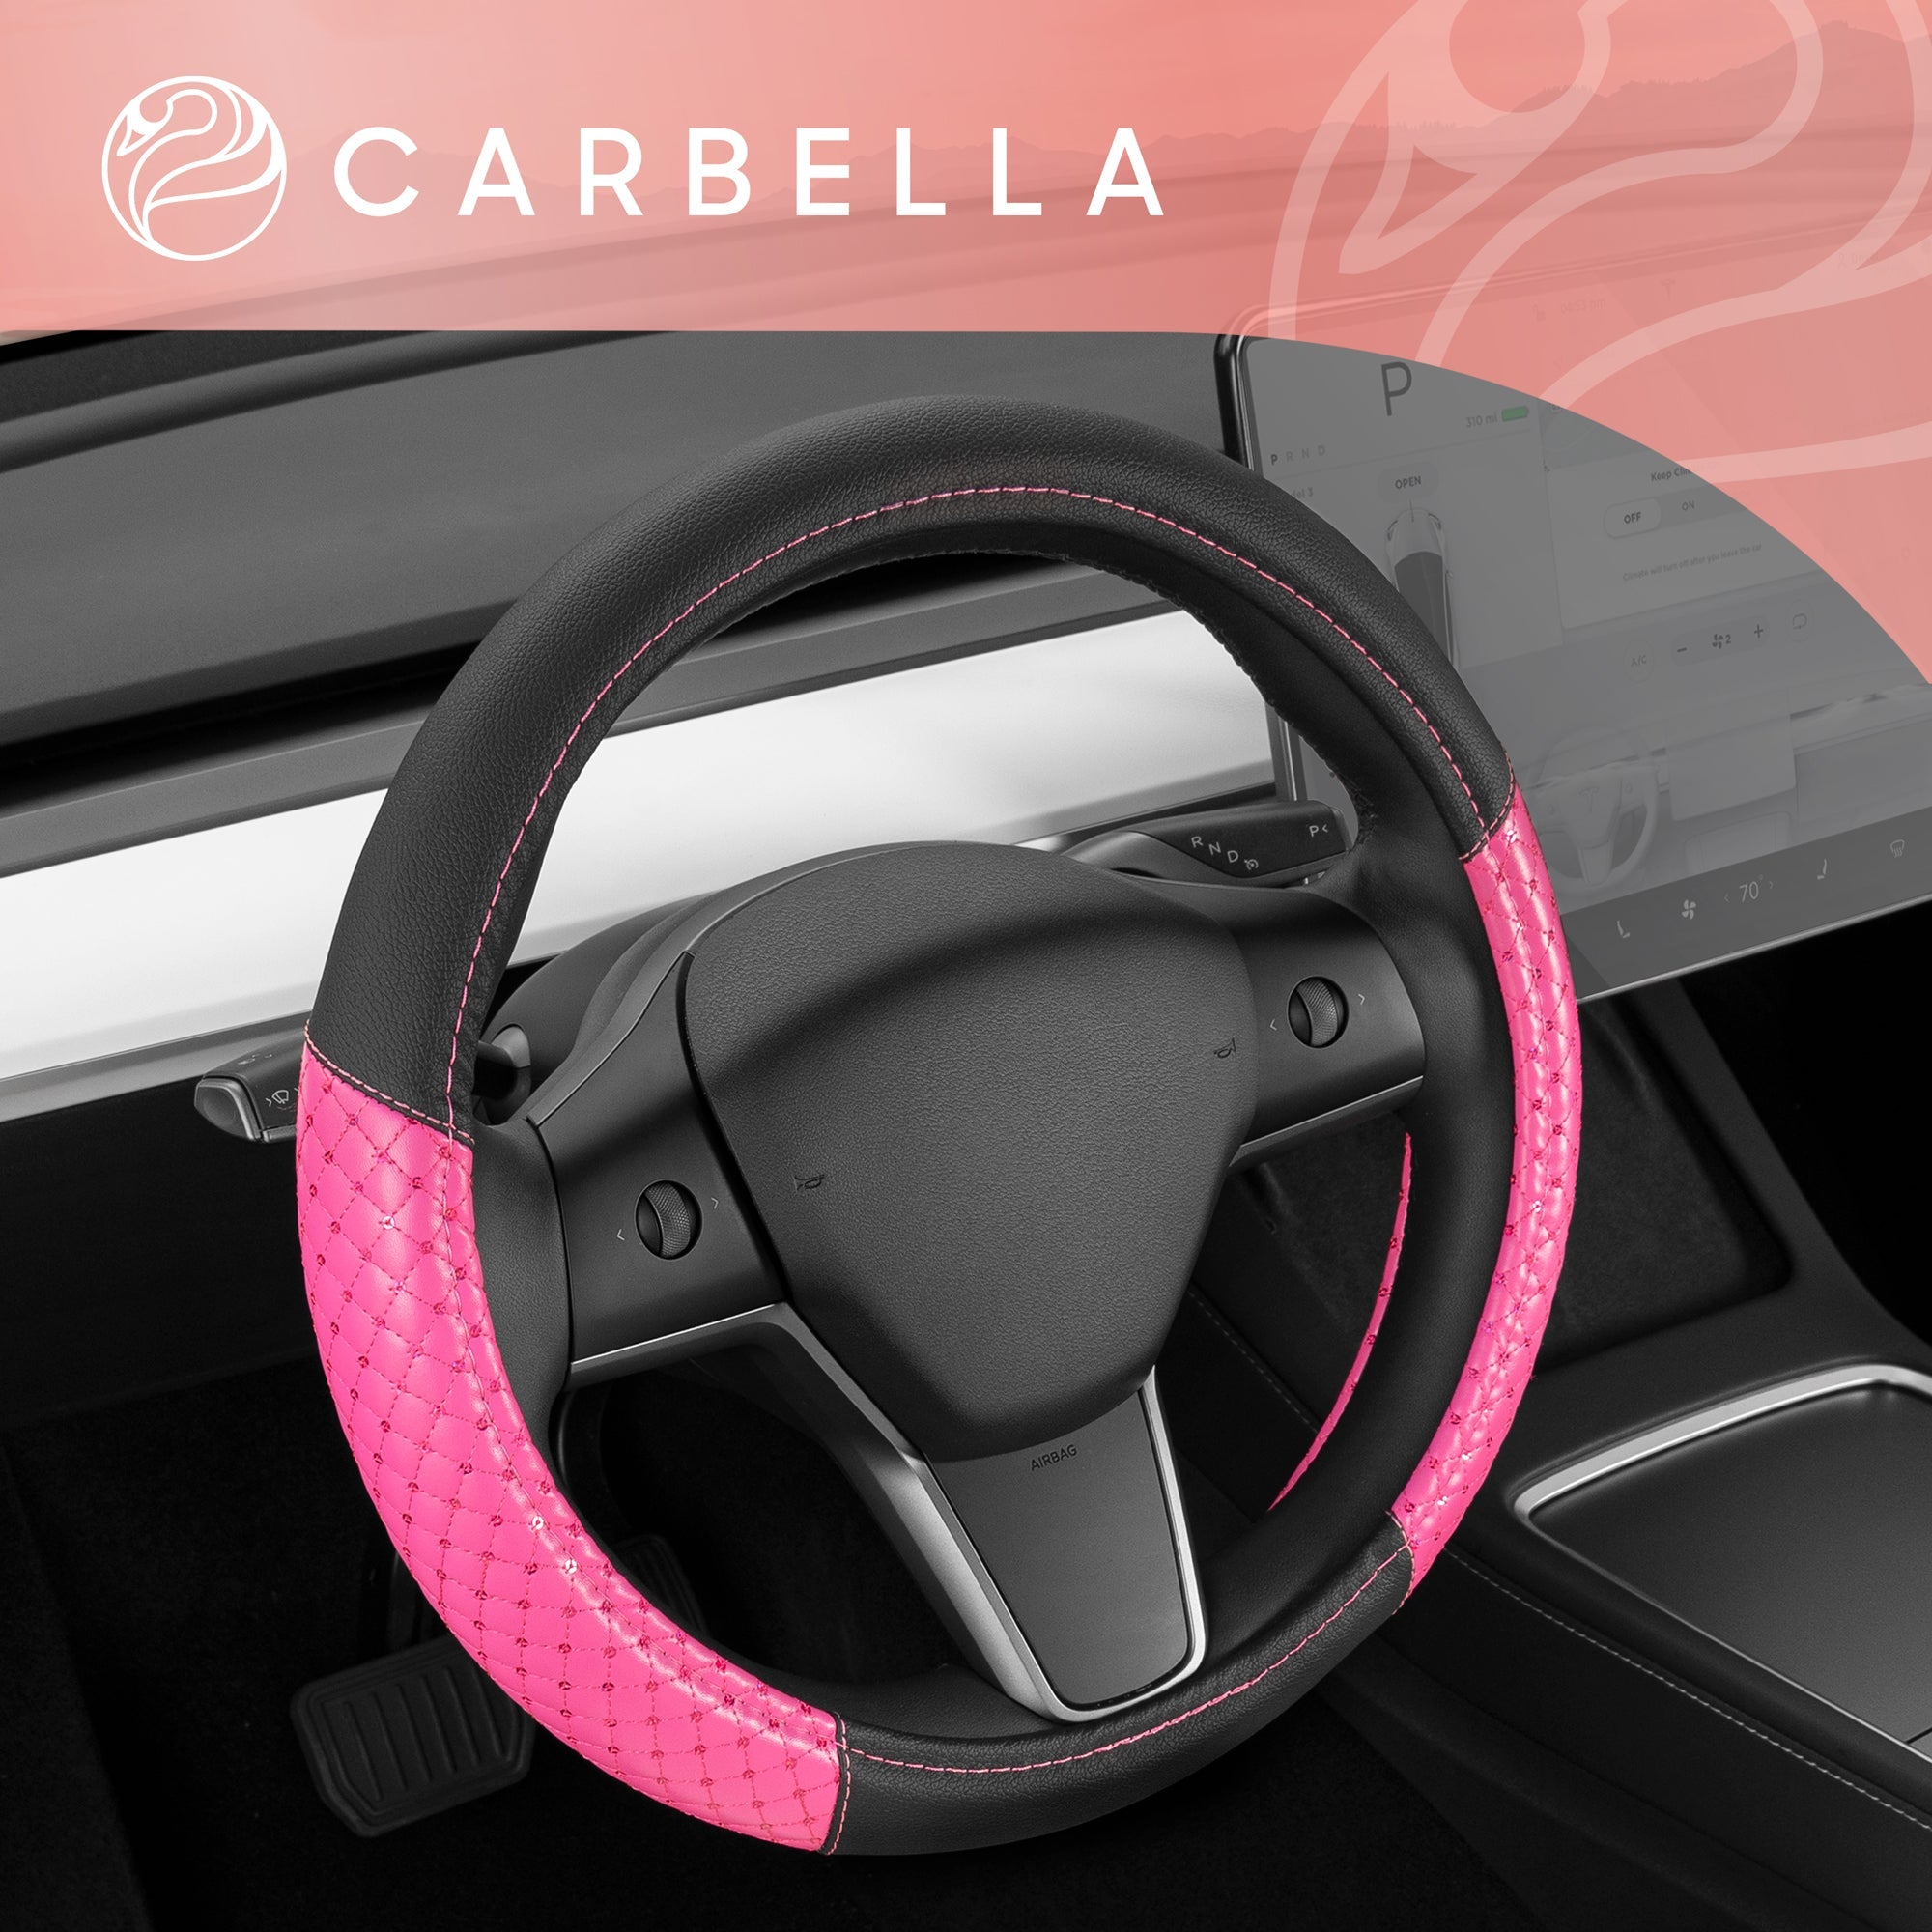 Carbella Pink Sequin Bling Steering Wheel Cover, Standard 15 Inch Size Fits Most Vehicles, Cute Faux Leather Car Steering Cover with Diamond Rhinestone Glitter Like Detail, Car Accessories for Women - Pink:#FF6BB0